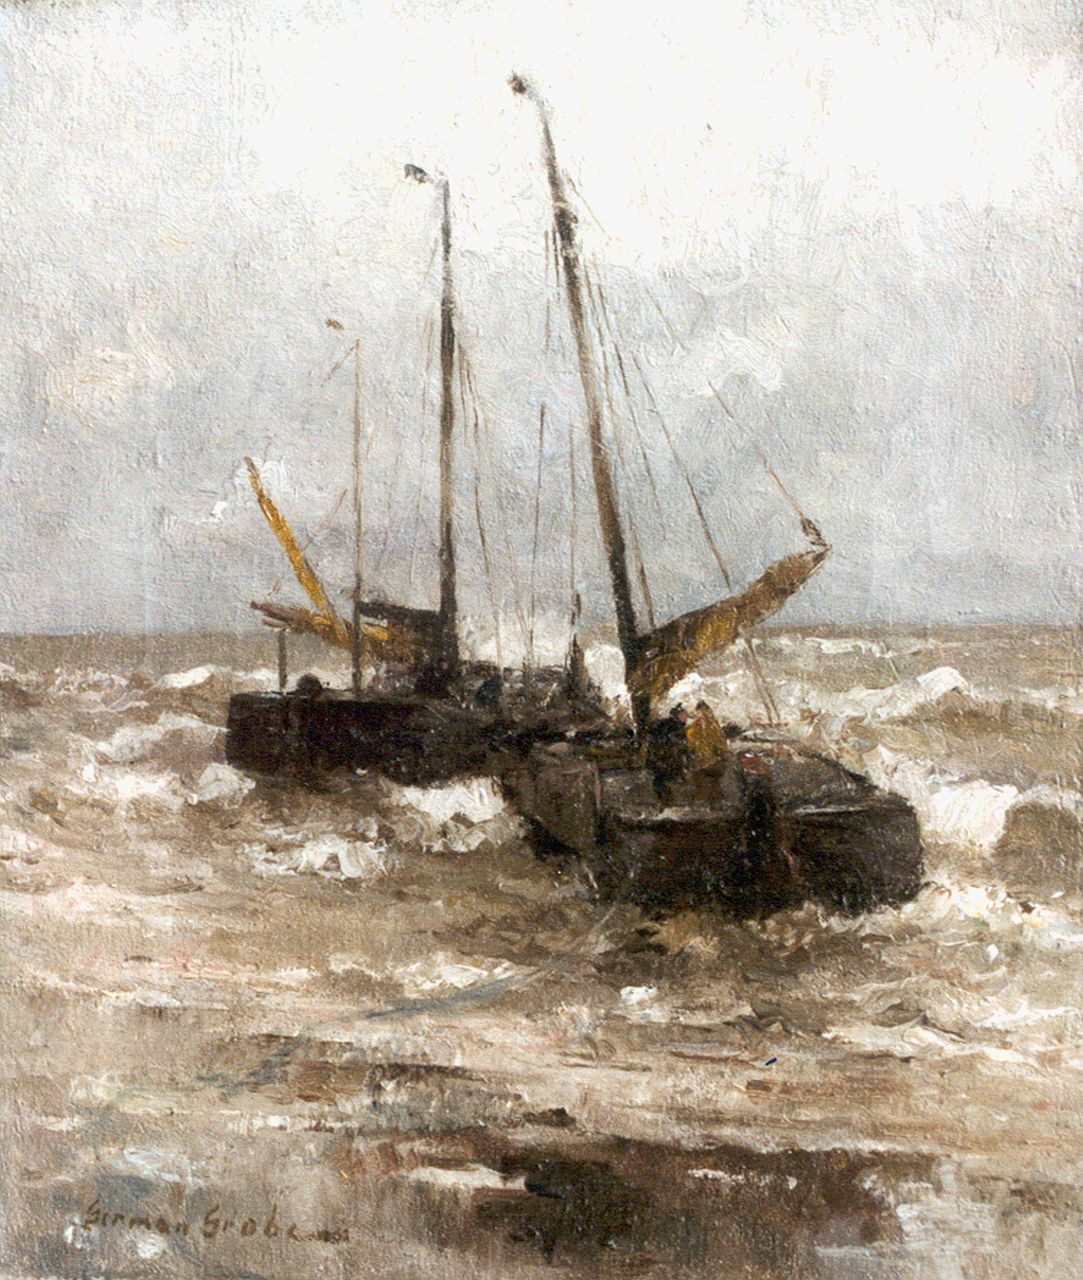 Grobe P.G.  | Philipp 'German' Grobe, 'Bomschuiten' setting out for Sea, oil on canvas 40.8 x 34.6 cm, signed l.l.